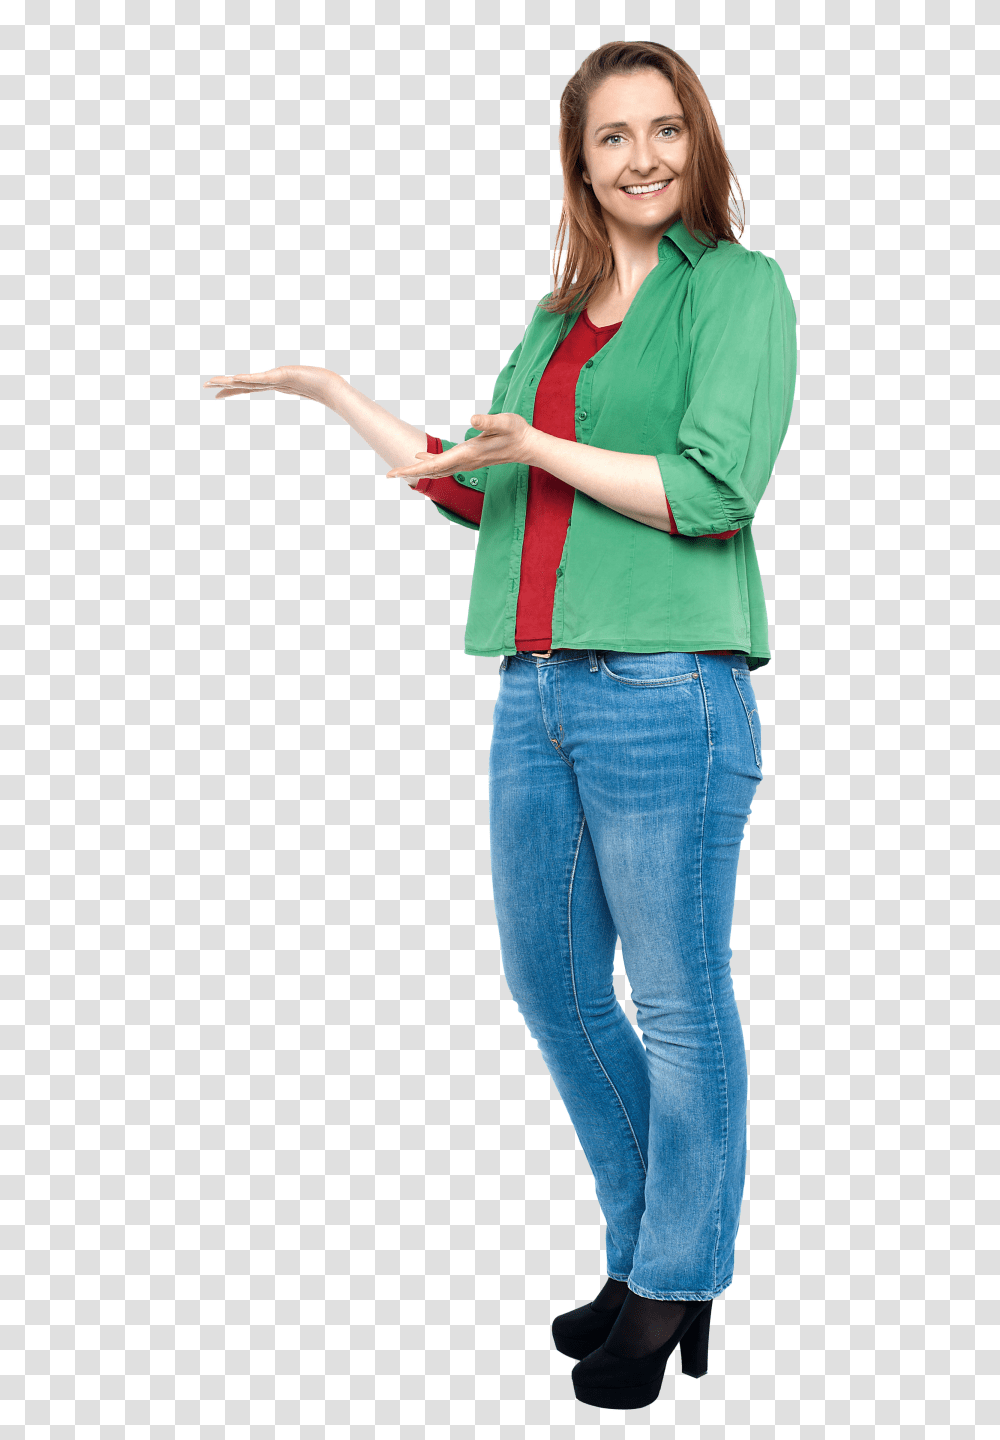 Women Pointing Left Image Purepng Free Portable Network Graphics, Person, Pants, Clothing, Jeans Transparent Png